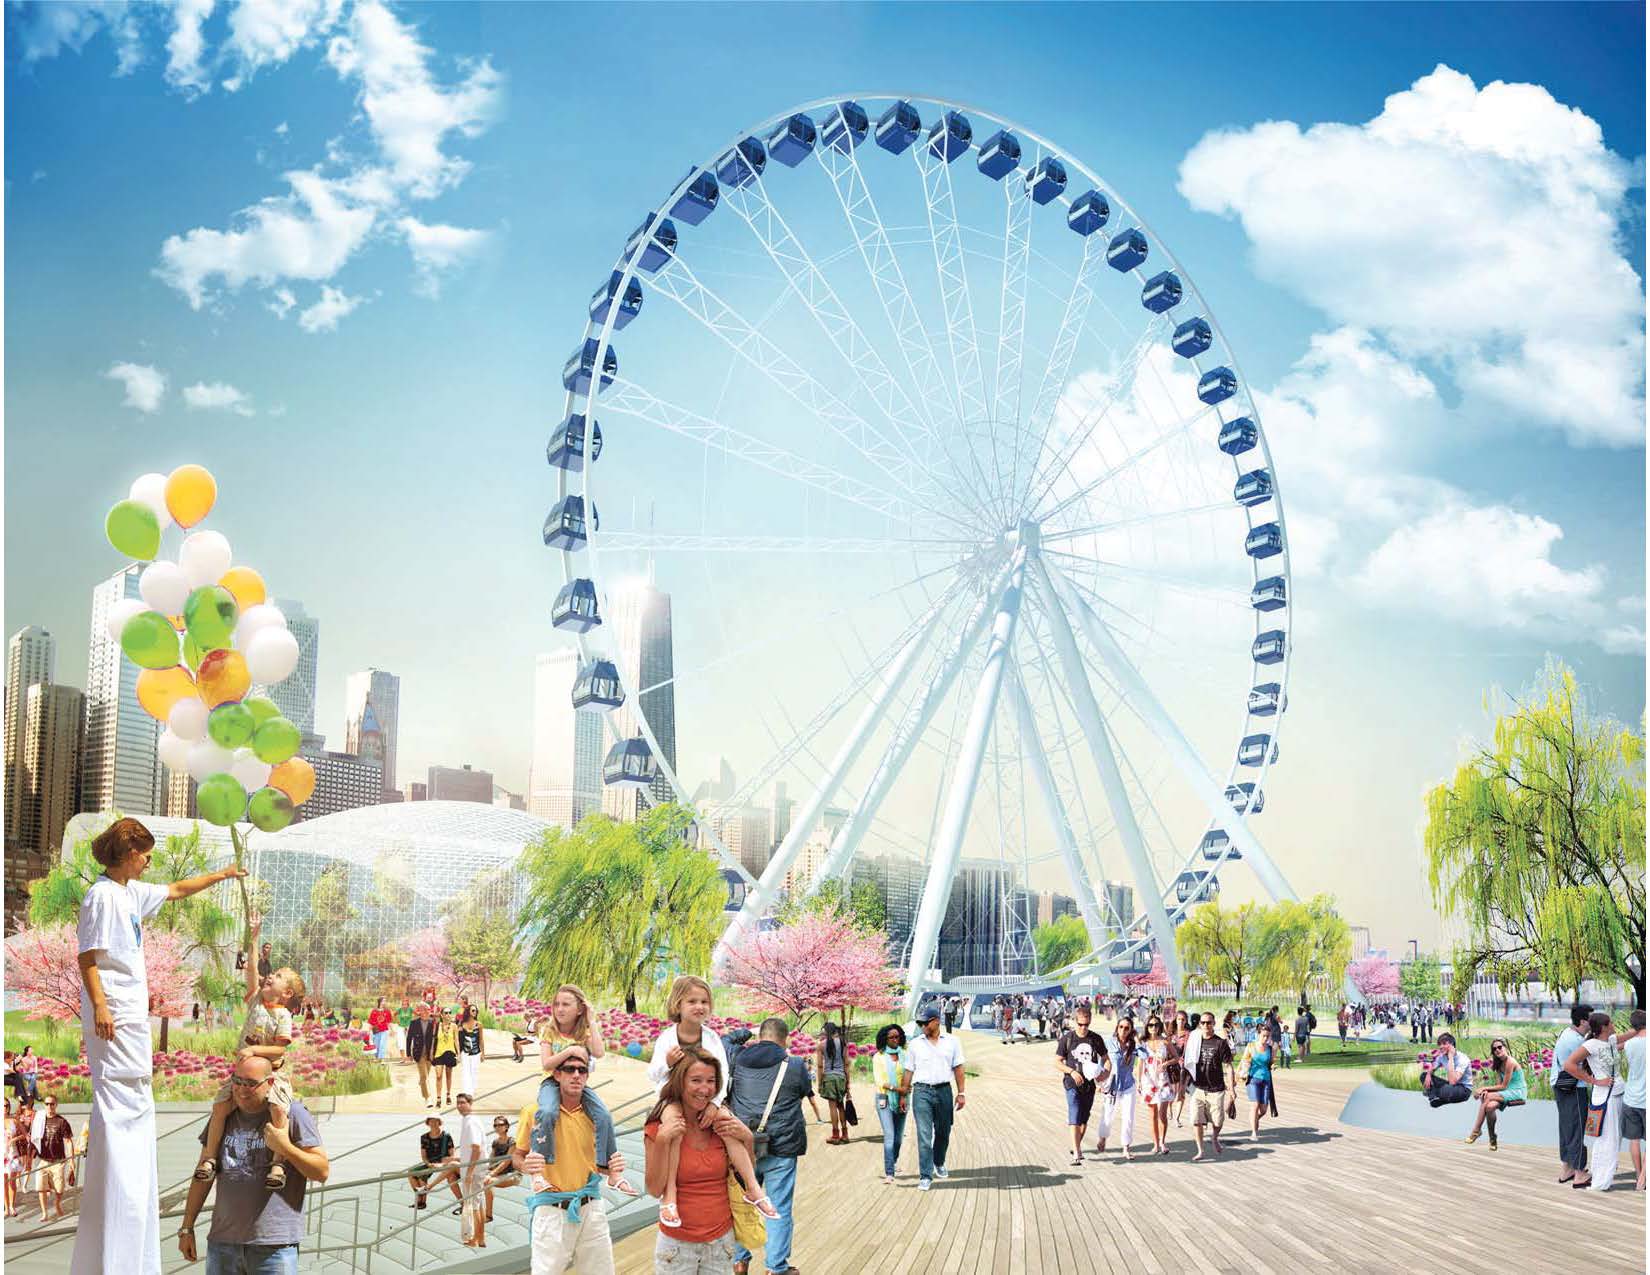 13 Facts about Navy Pier's New Ferris Wheel